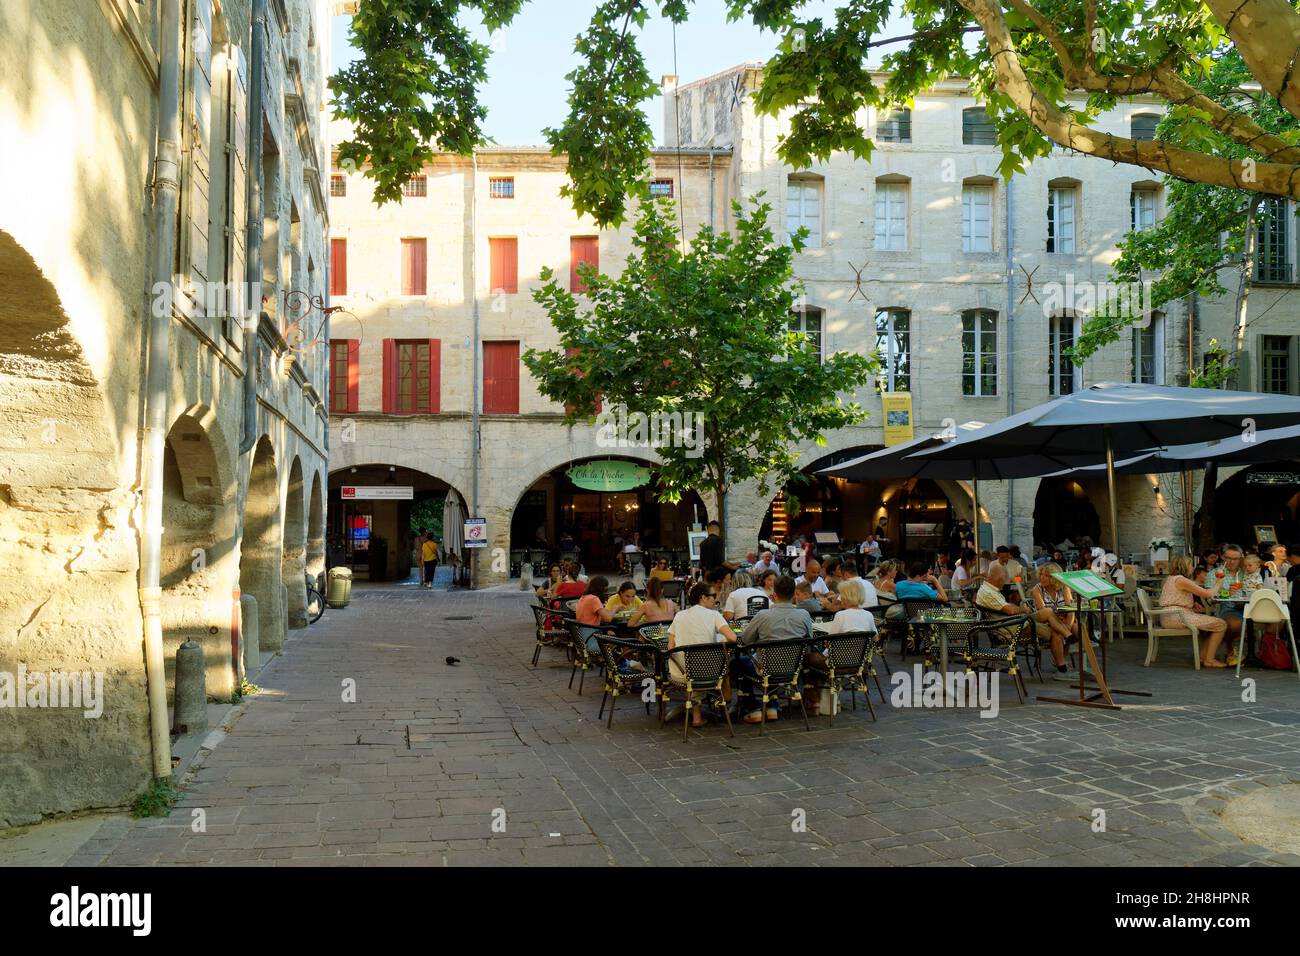 France, Gard, Pays d'Uzege, Uzes, the Place aux Herbes surrounded by arcaded houses and its outdoor cafes Stock Photo